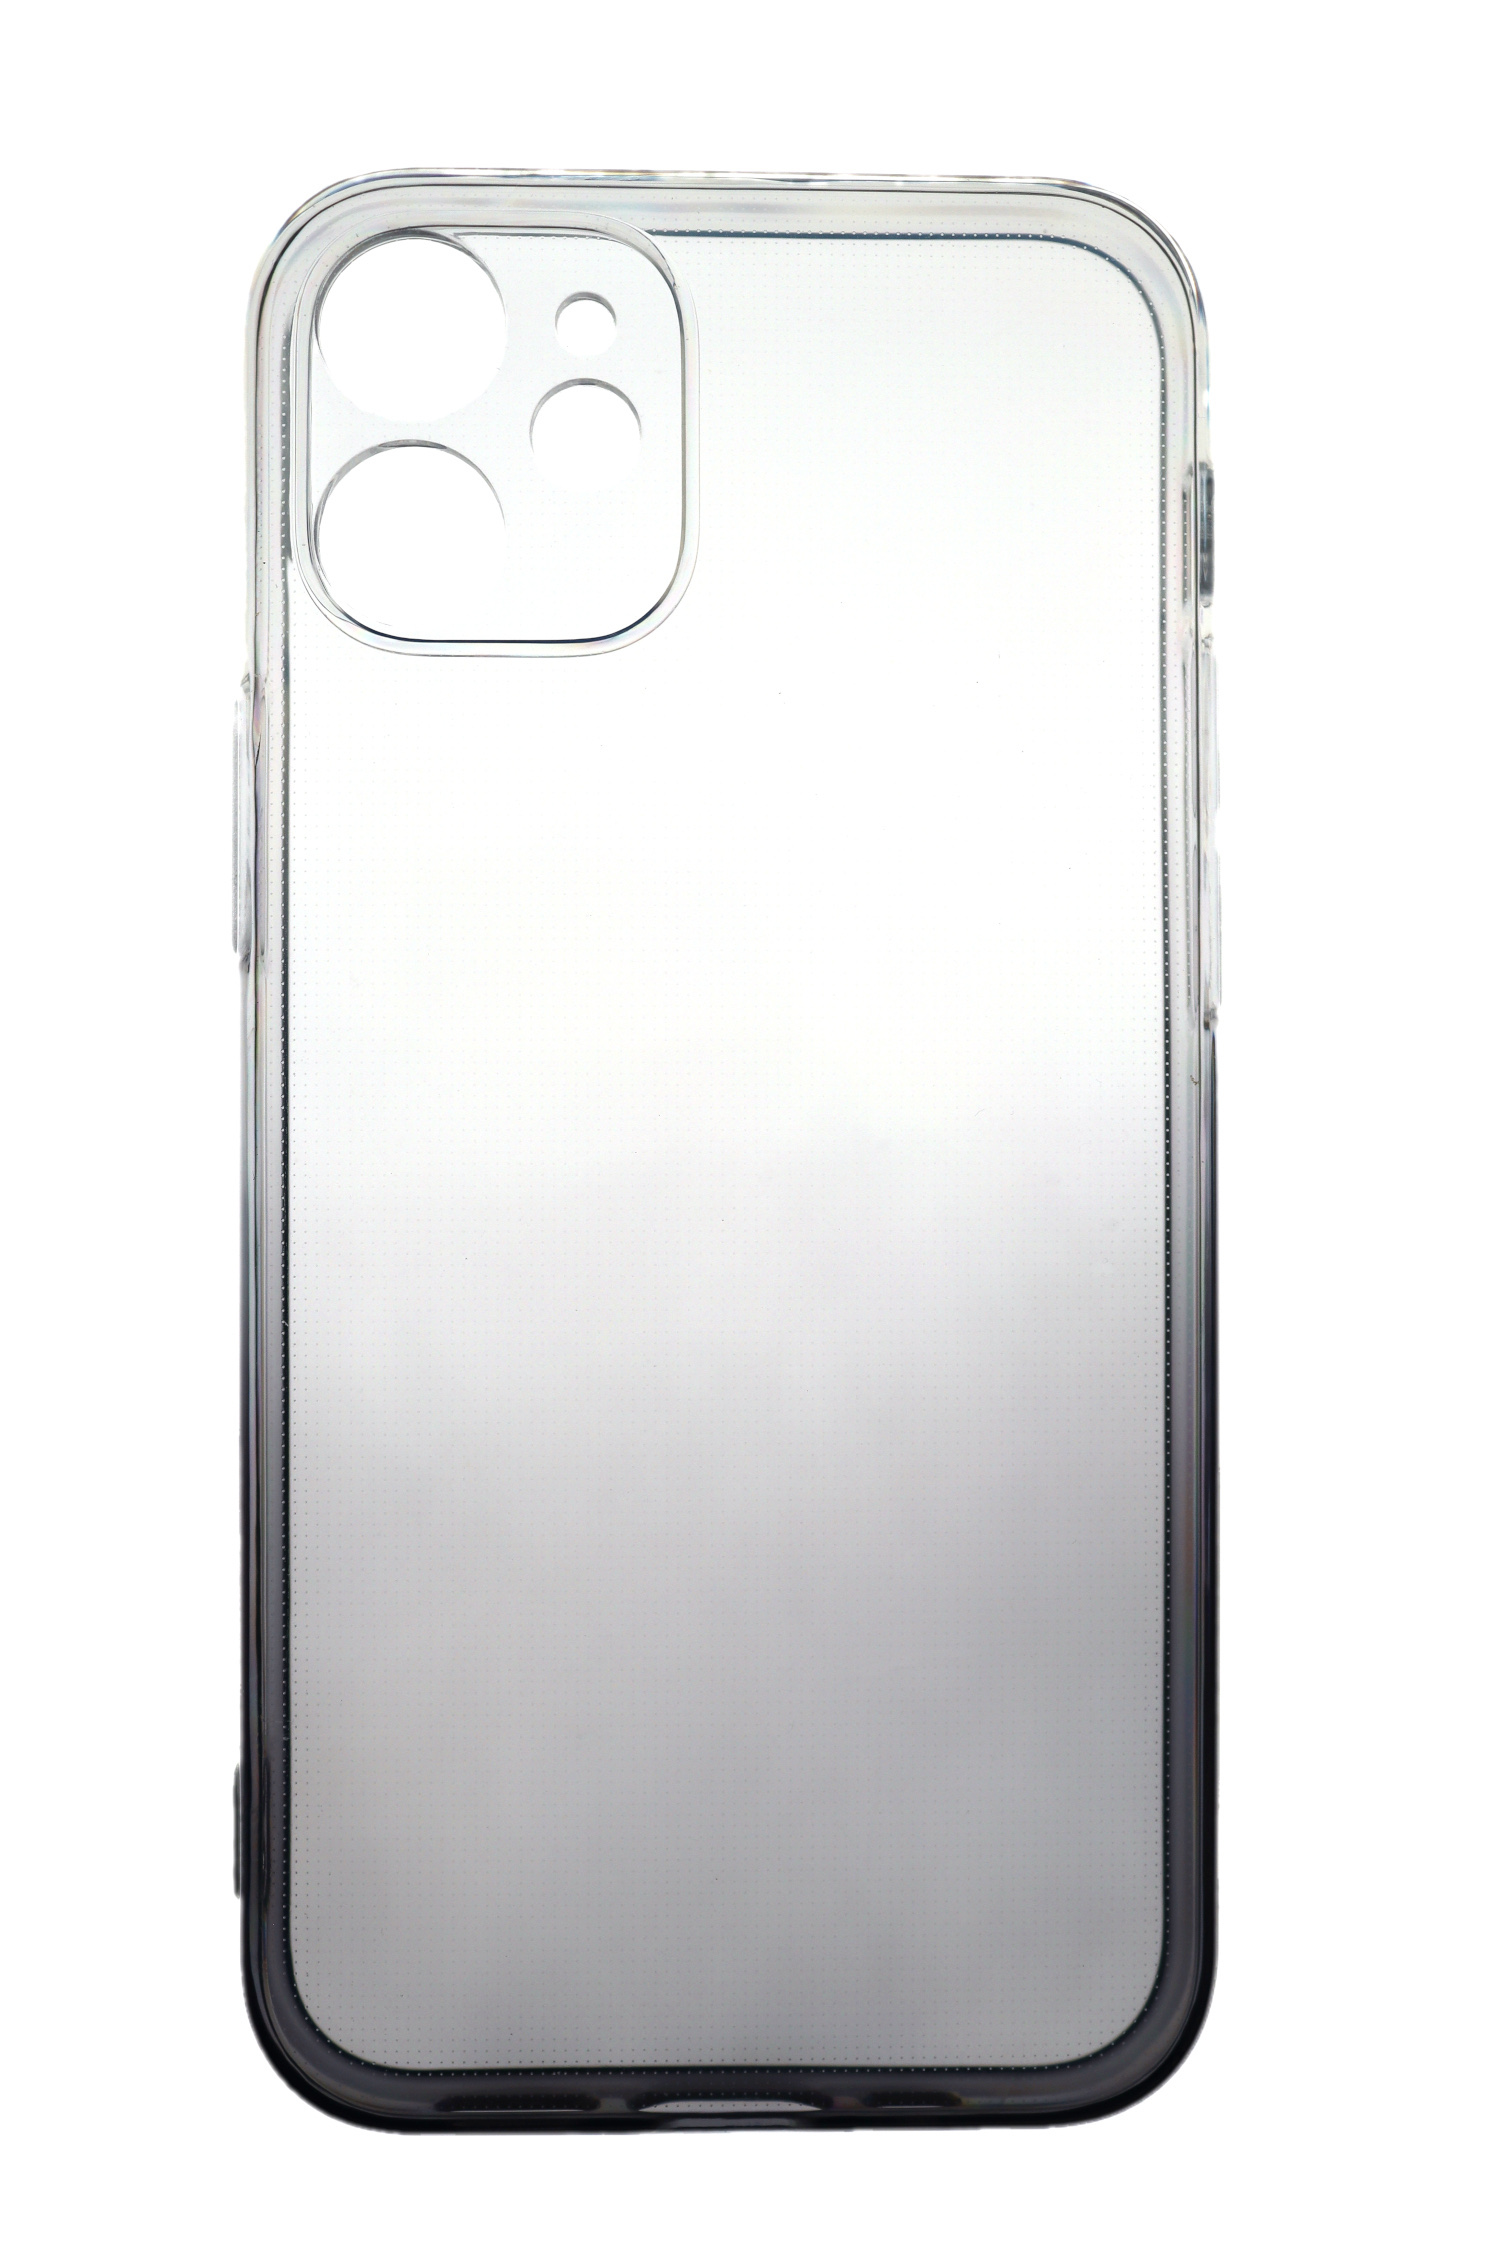 2.0 iPhone Transparent 11, Backcover, TPU JAMCOVER Grau, mm Apple, Strong, Case